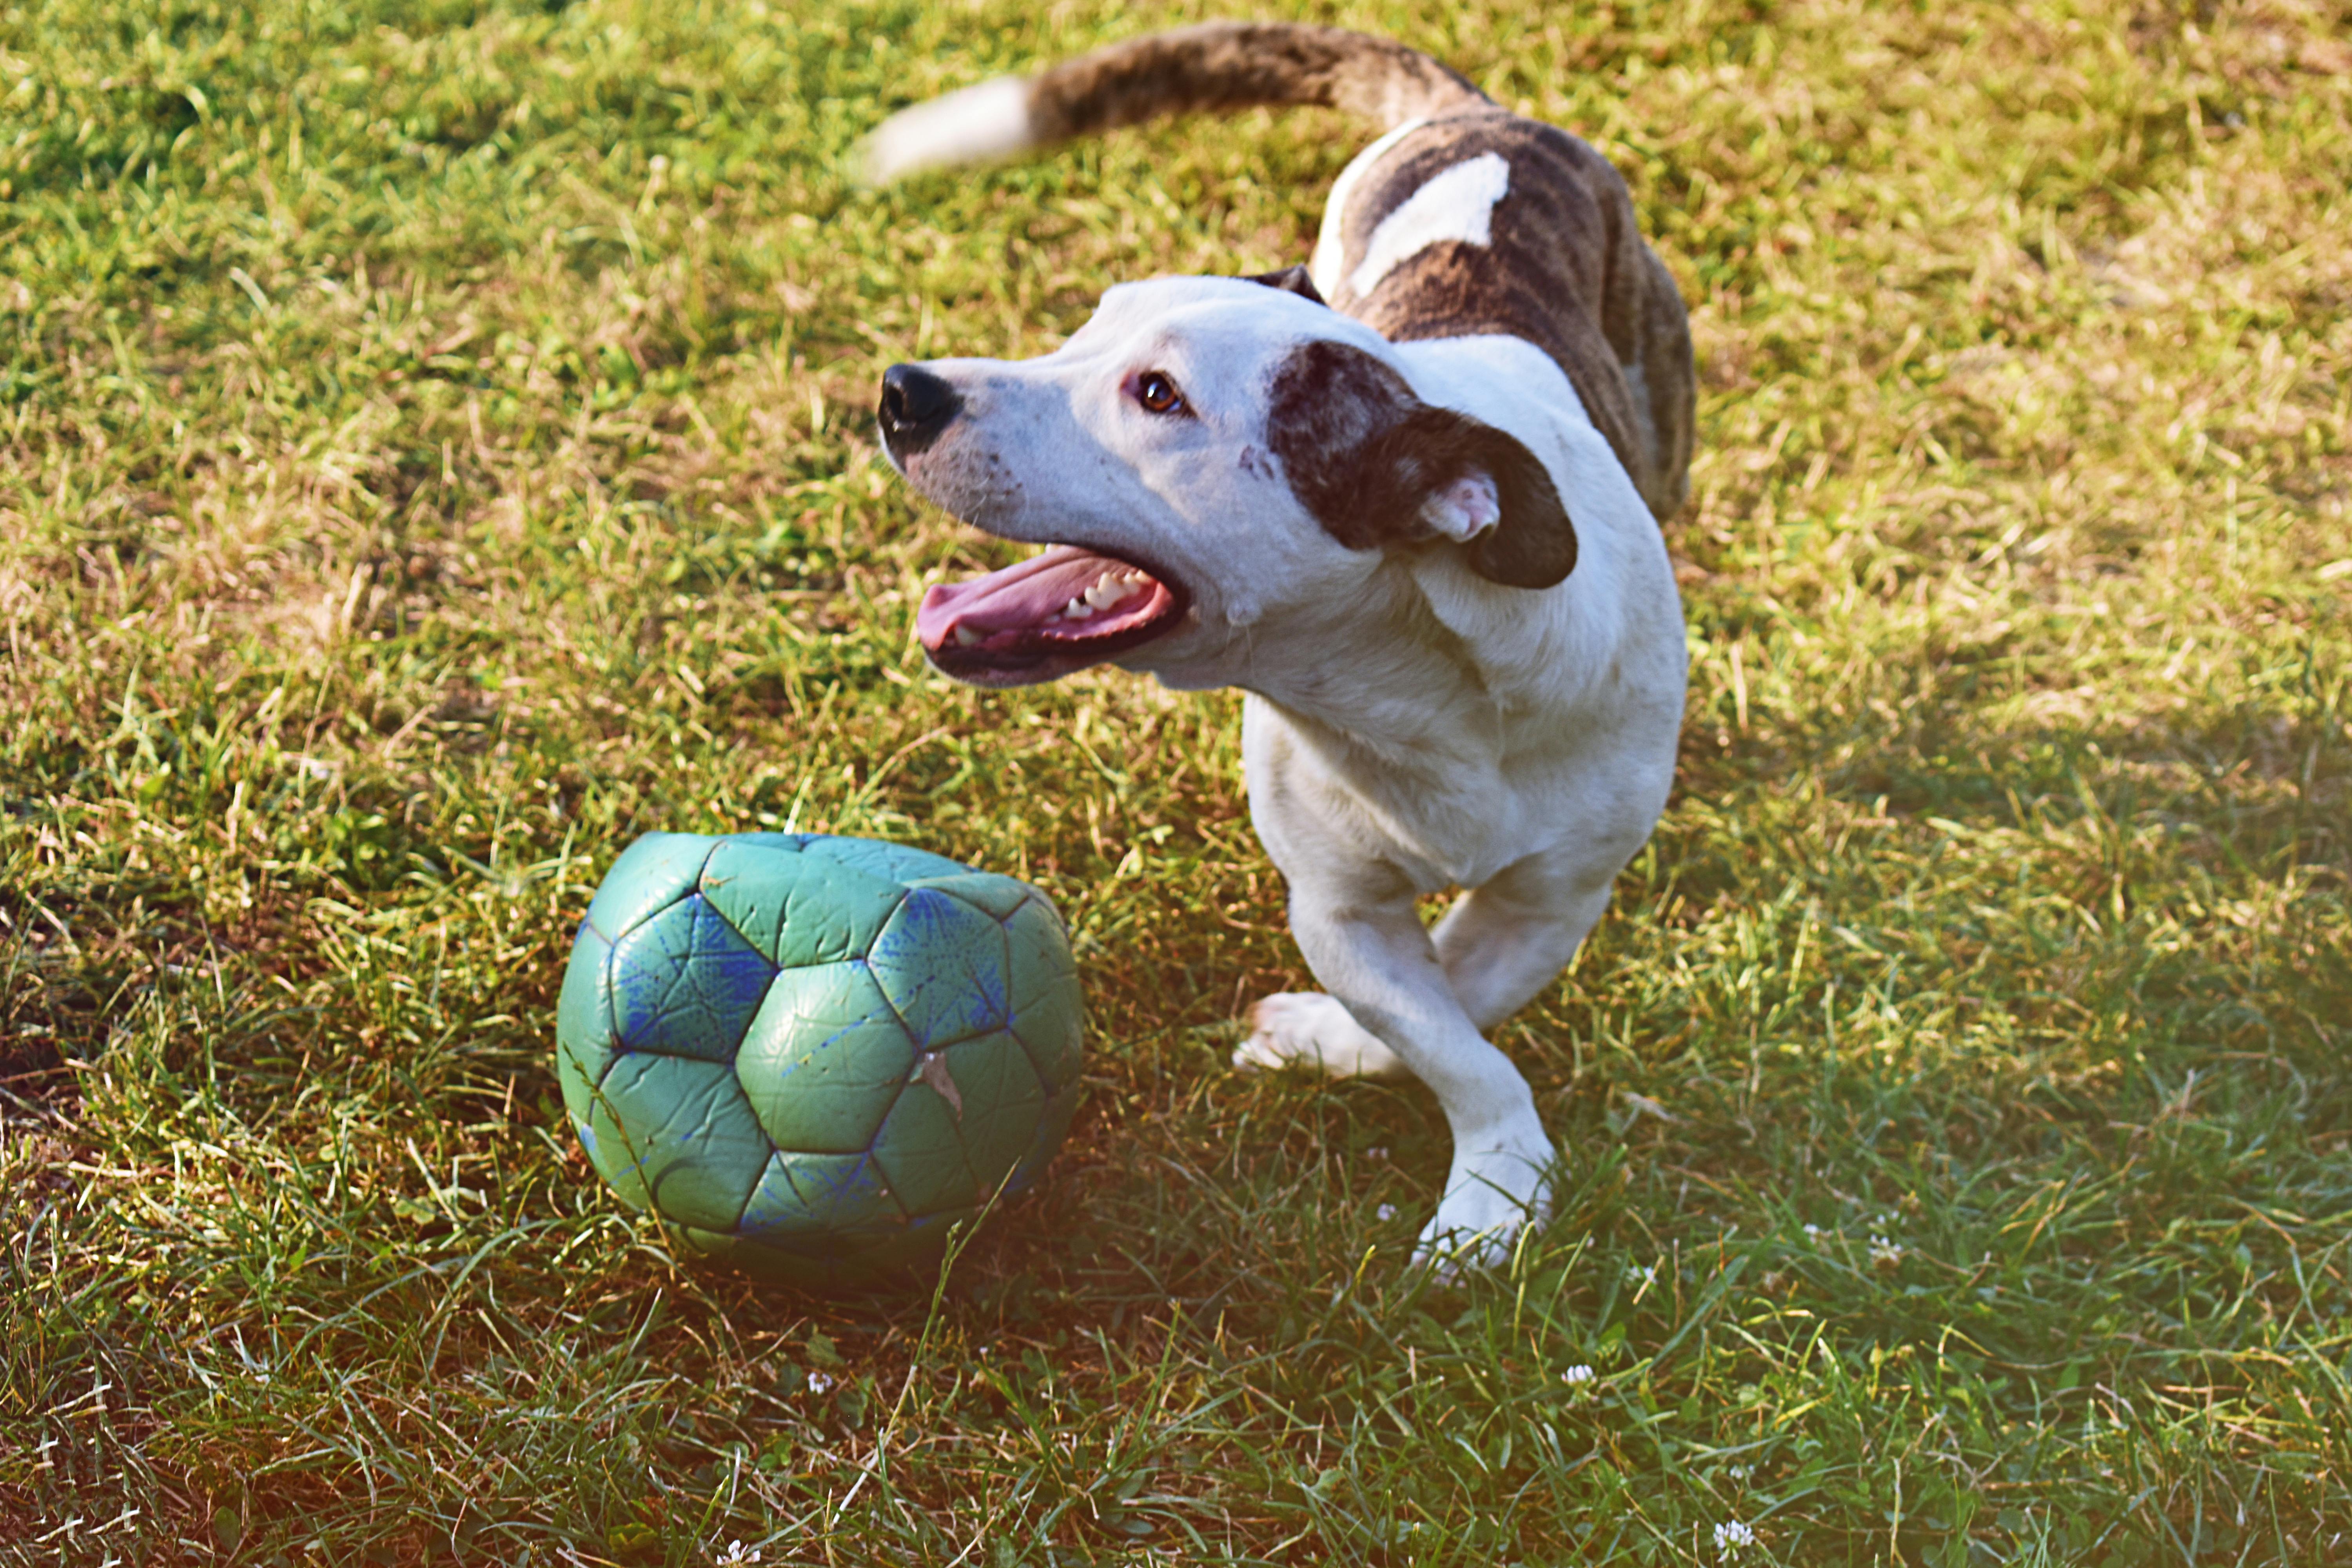 brindle and white puppy playing ball on grass field